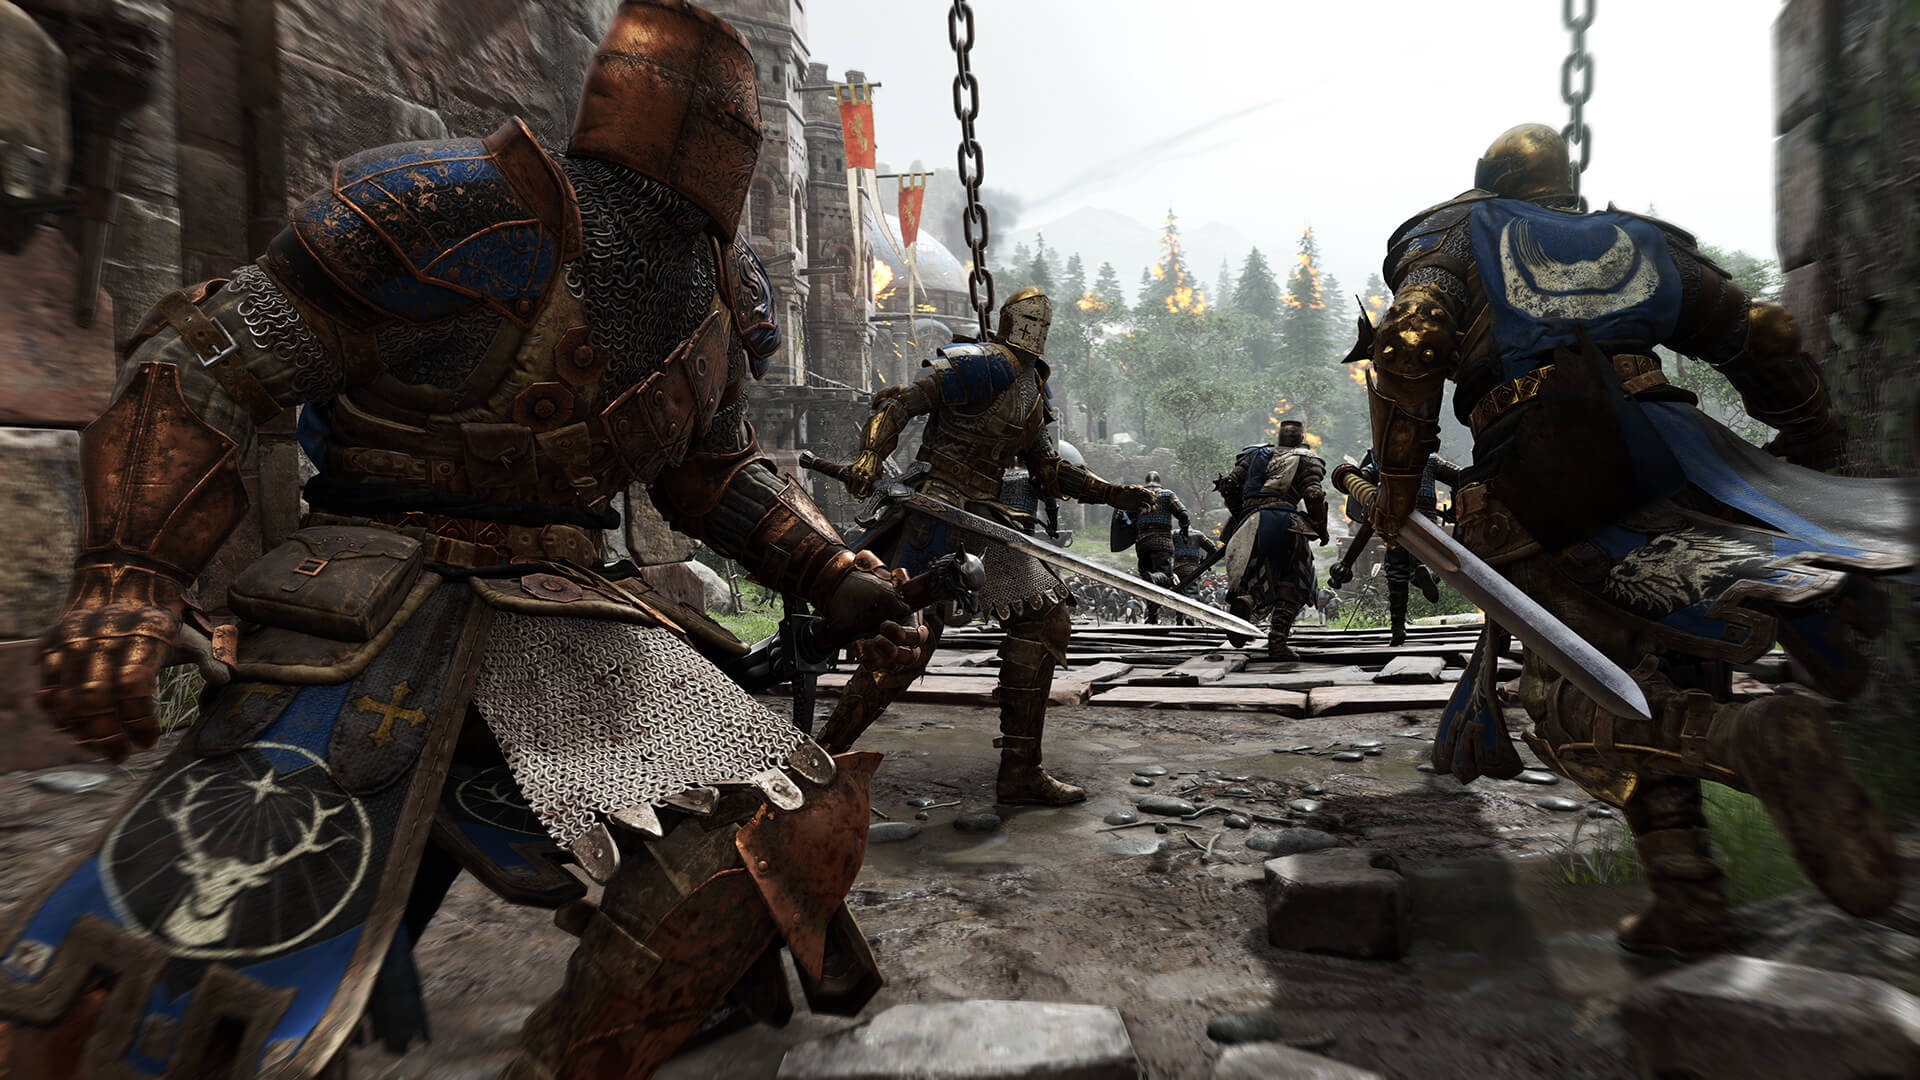 Blue knights For Honor